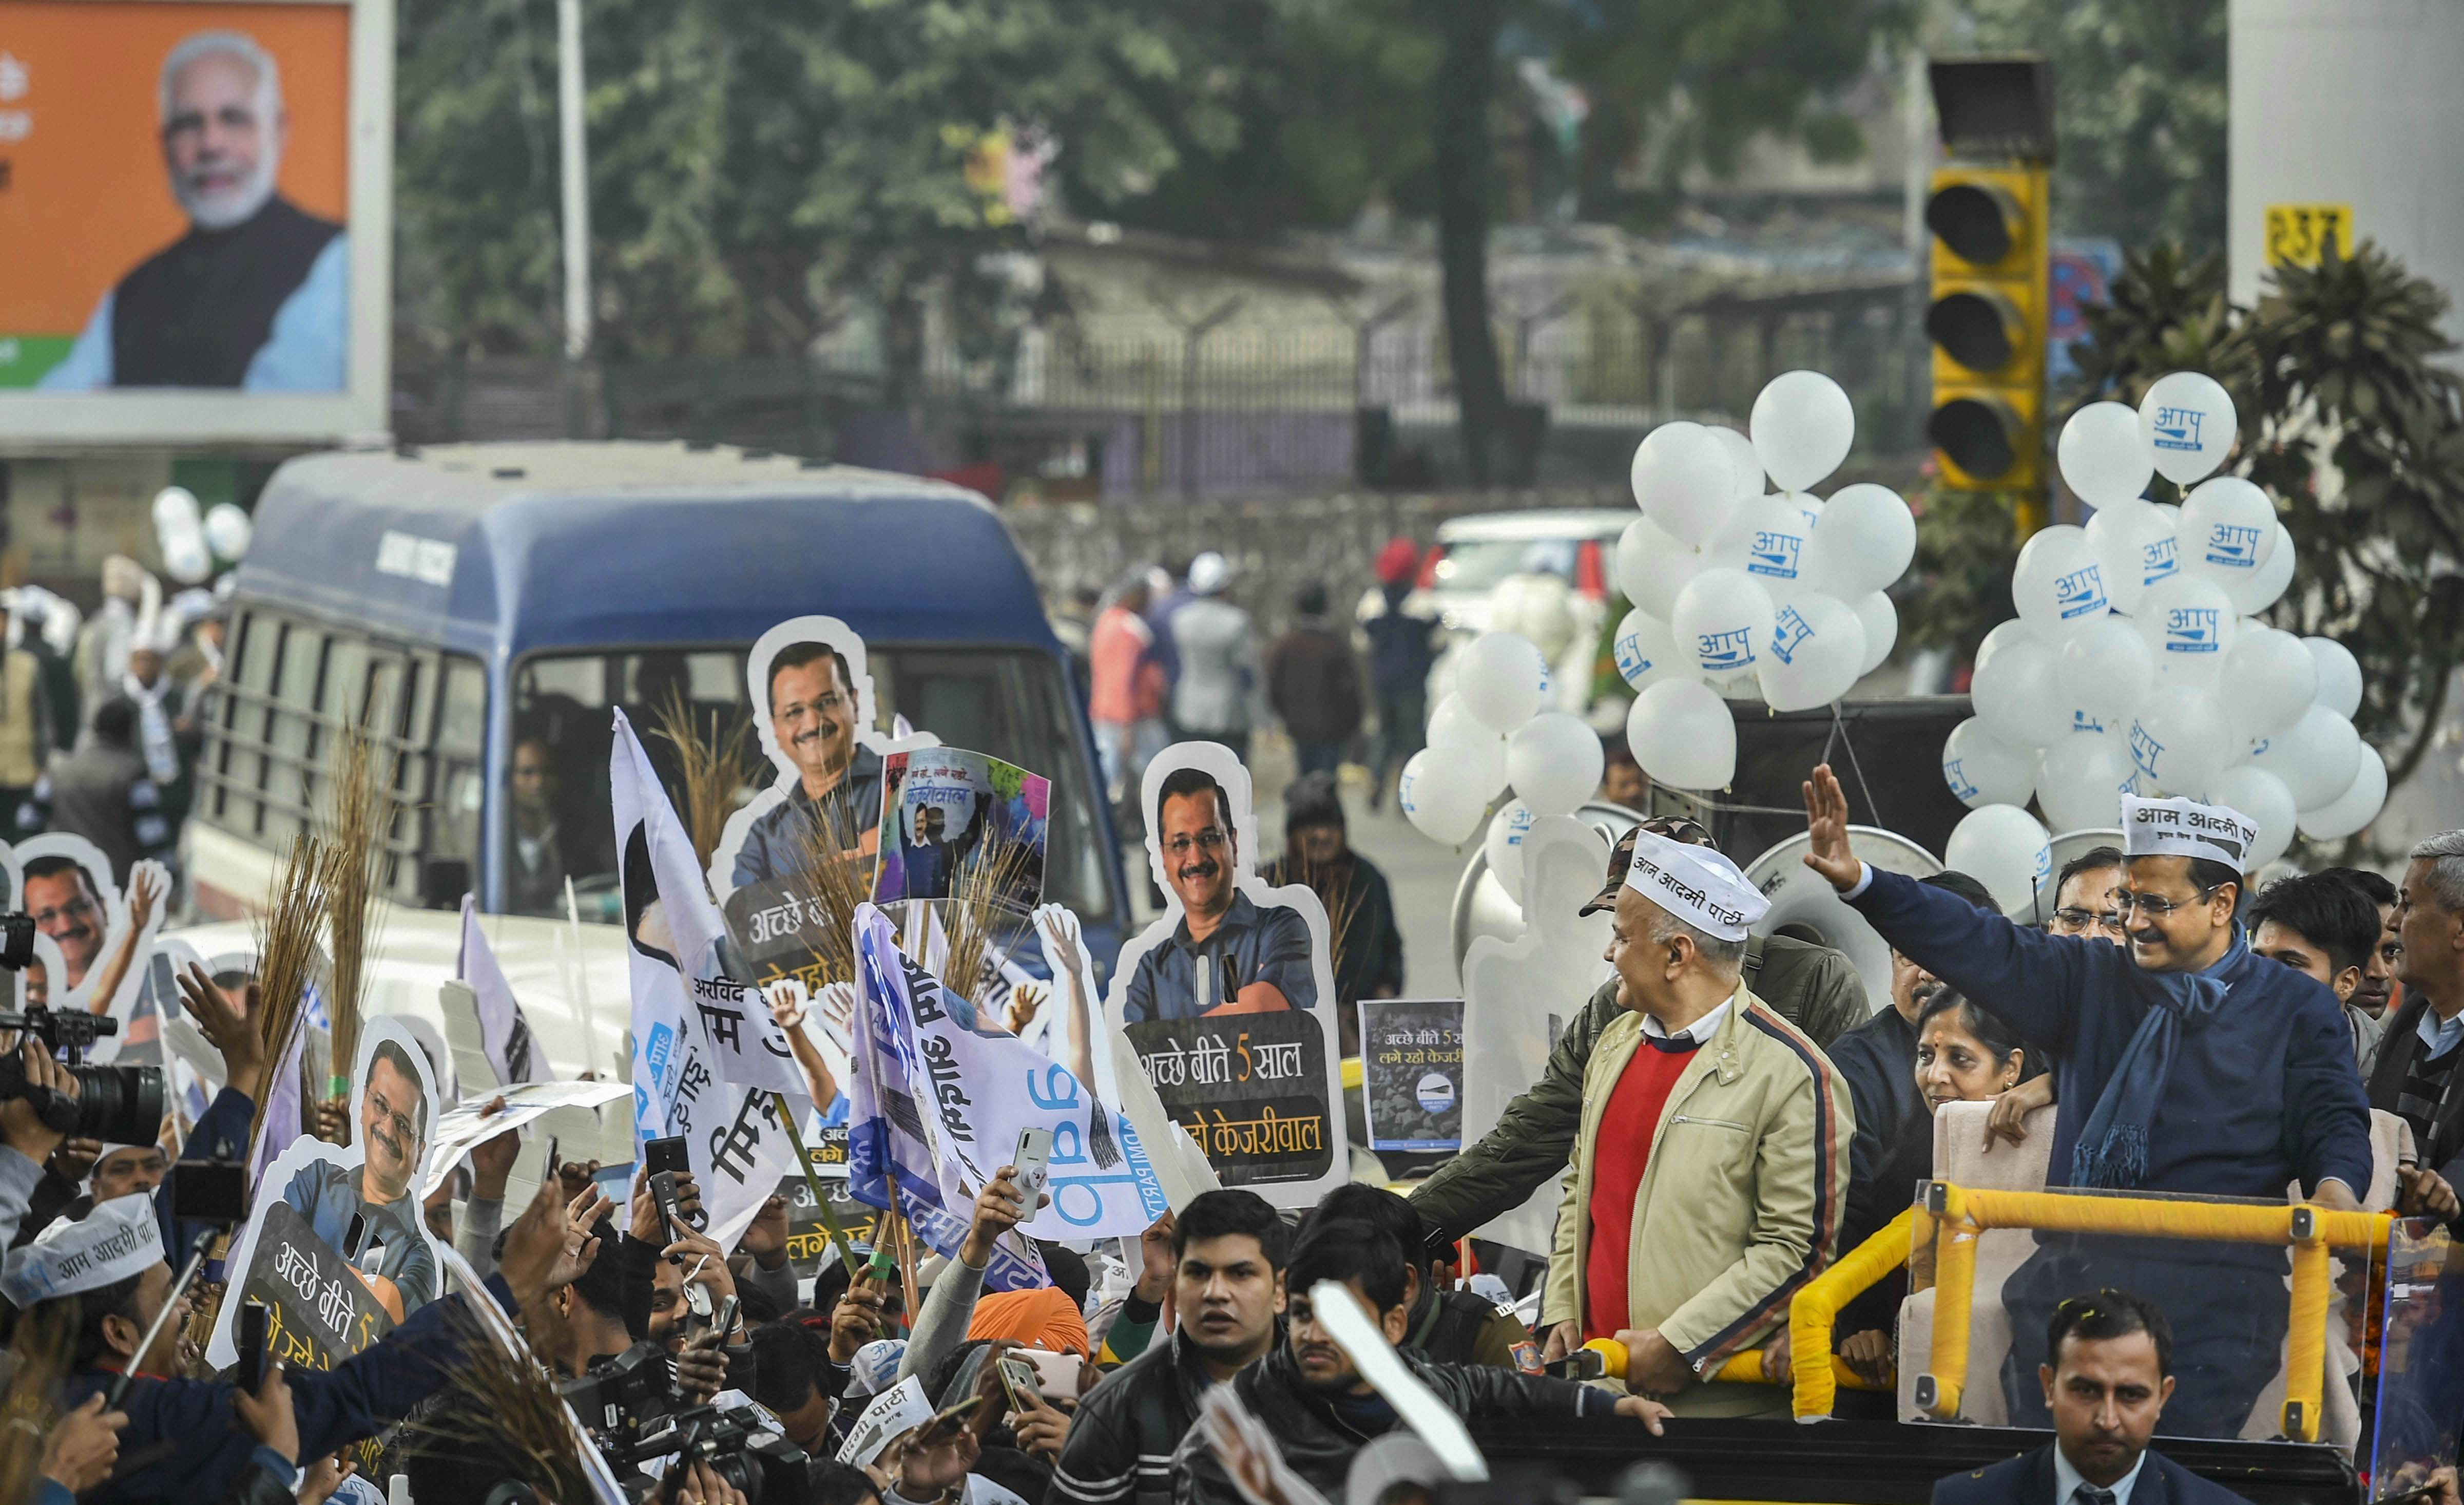 AAP convener and Delhi chief minister Arvind Kejriwal waves from an open vehicle during a roadshow, in New Delhi, Monday, January 20, 2020.
